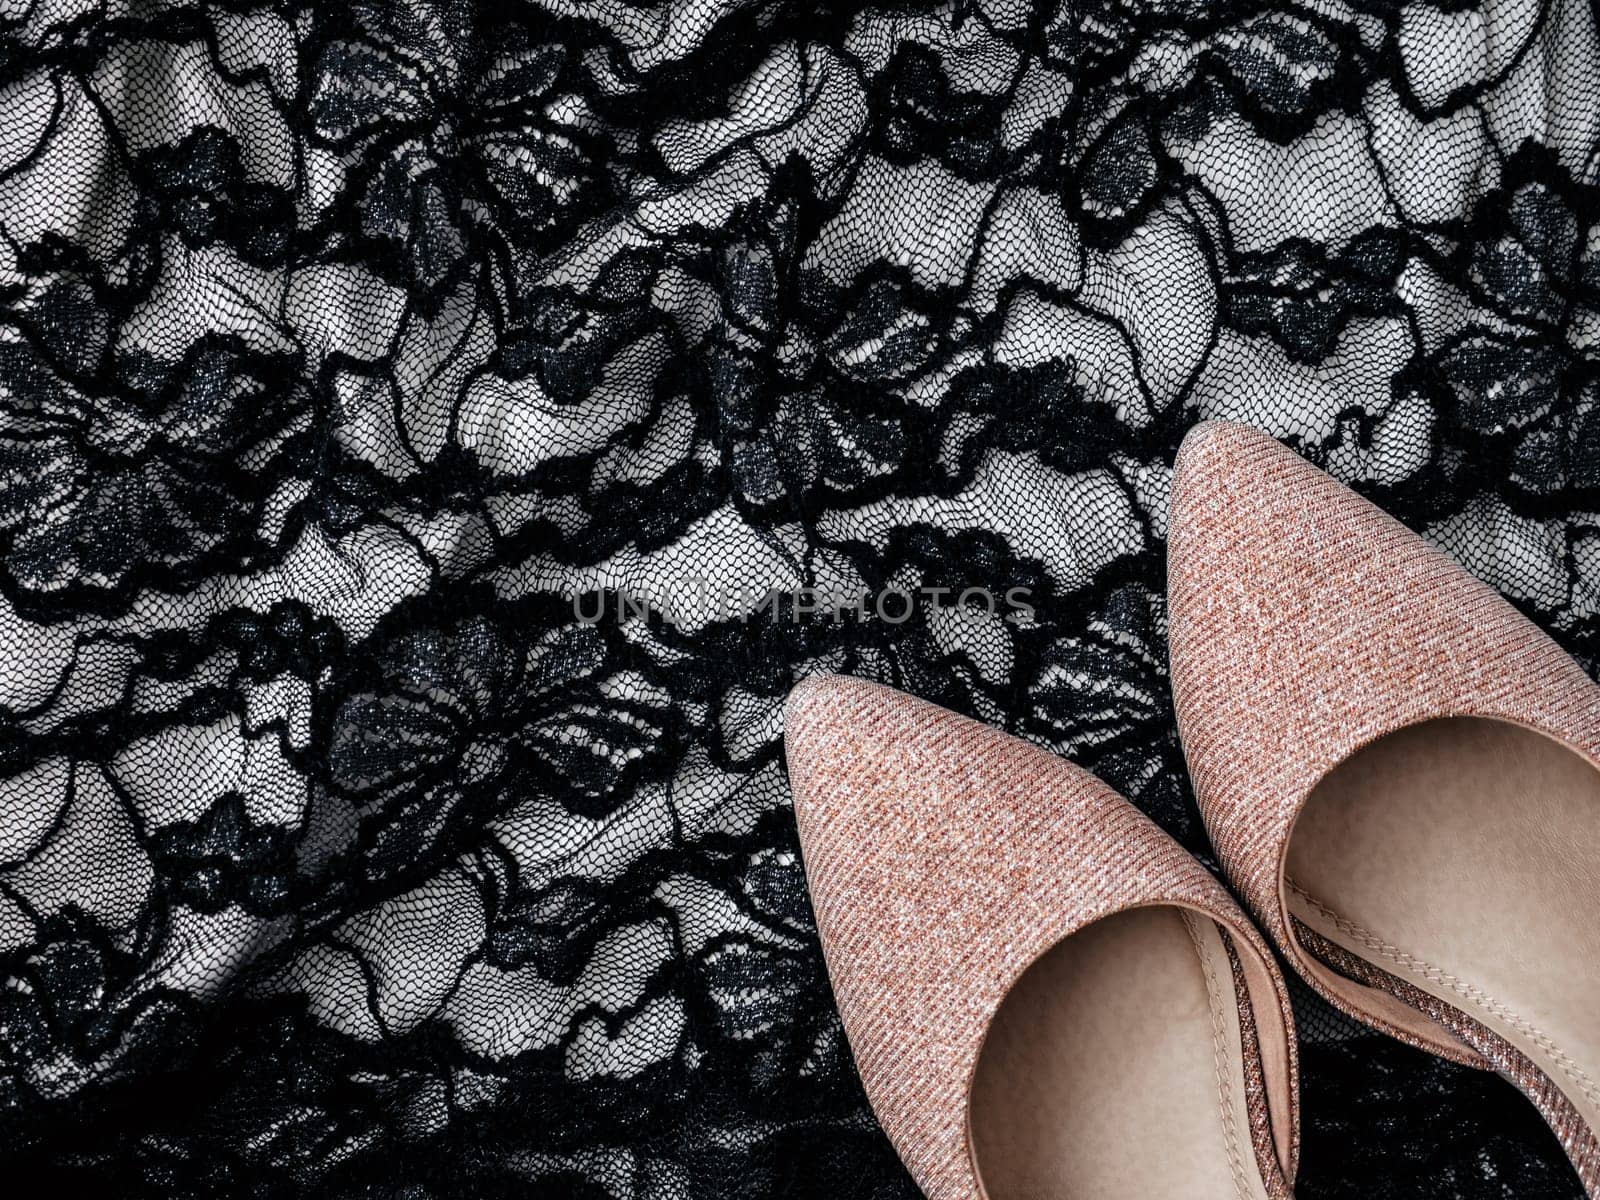 Glittery pink shoes and lace black dress as background. Sexy fashion concept with women's clothes and accessories. Flat lay, top view. Minimal feminine vogue concept. Party time